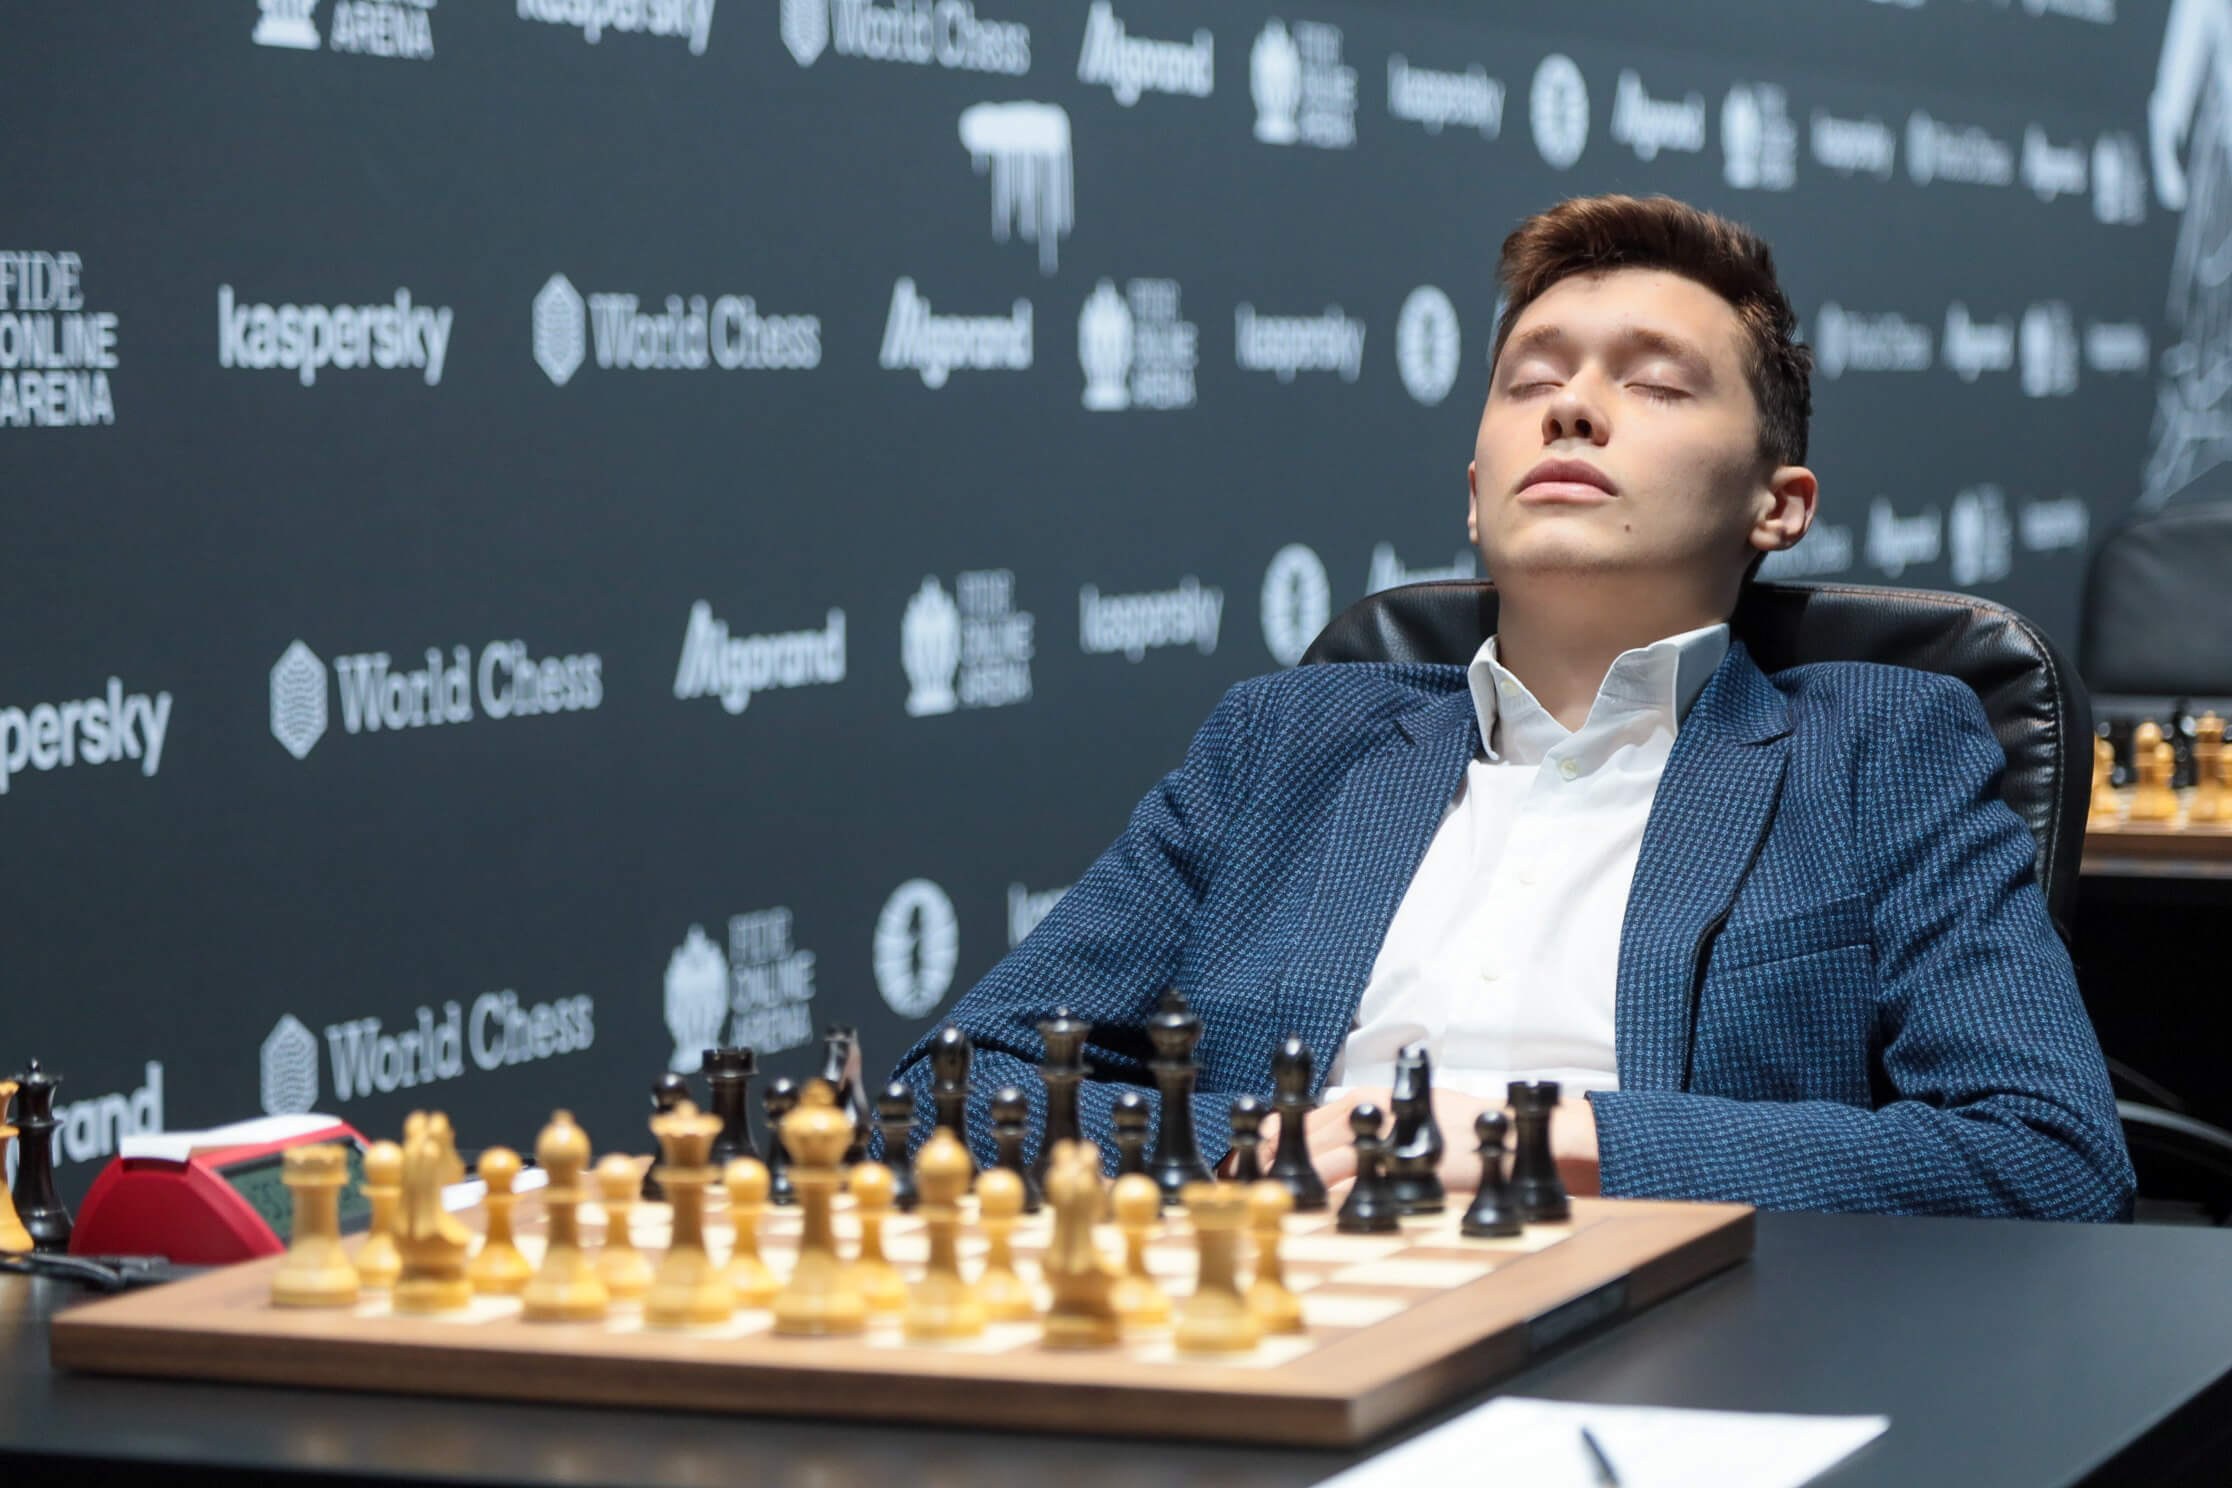 FIDE Grand Prix Final - Games and results